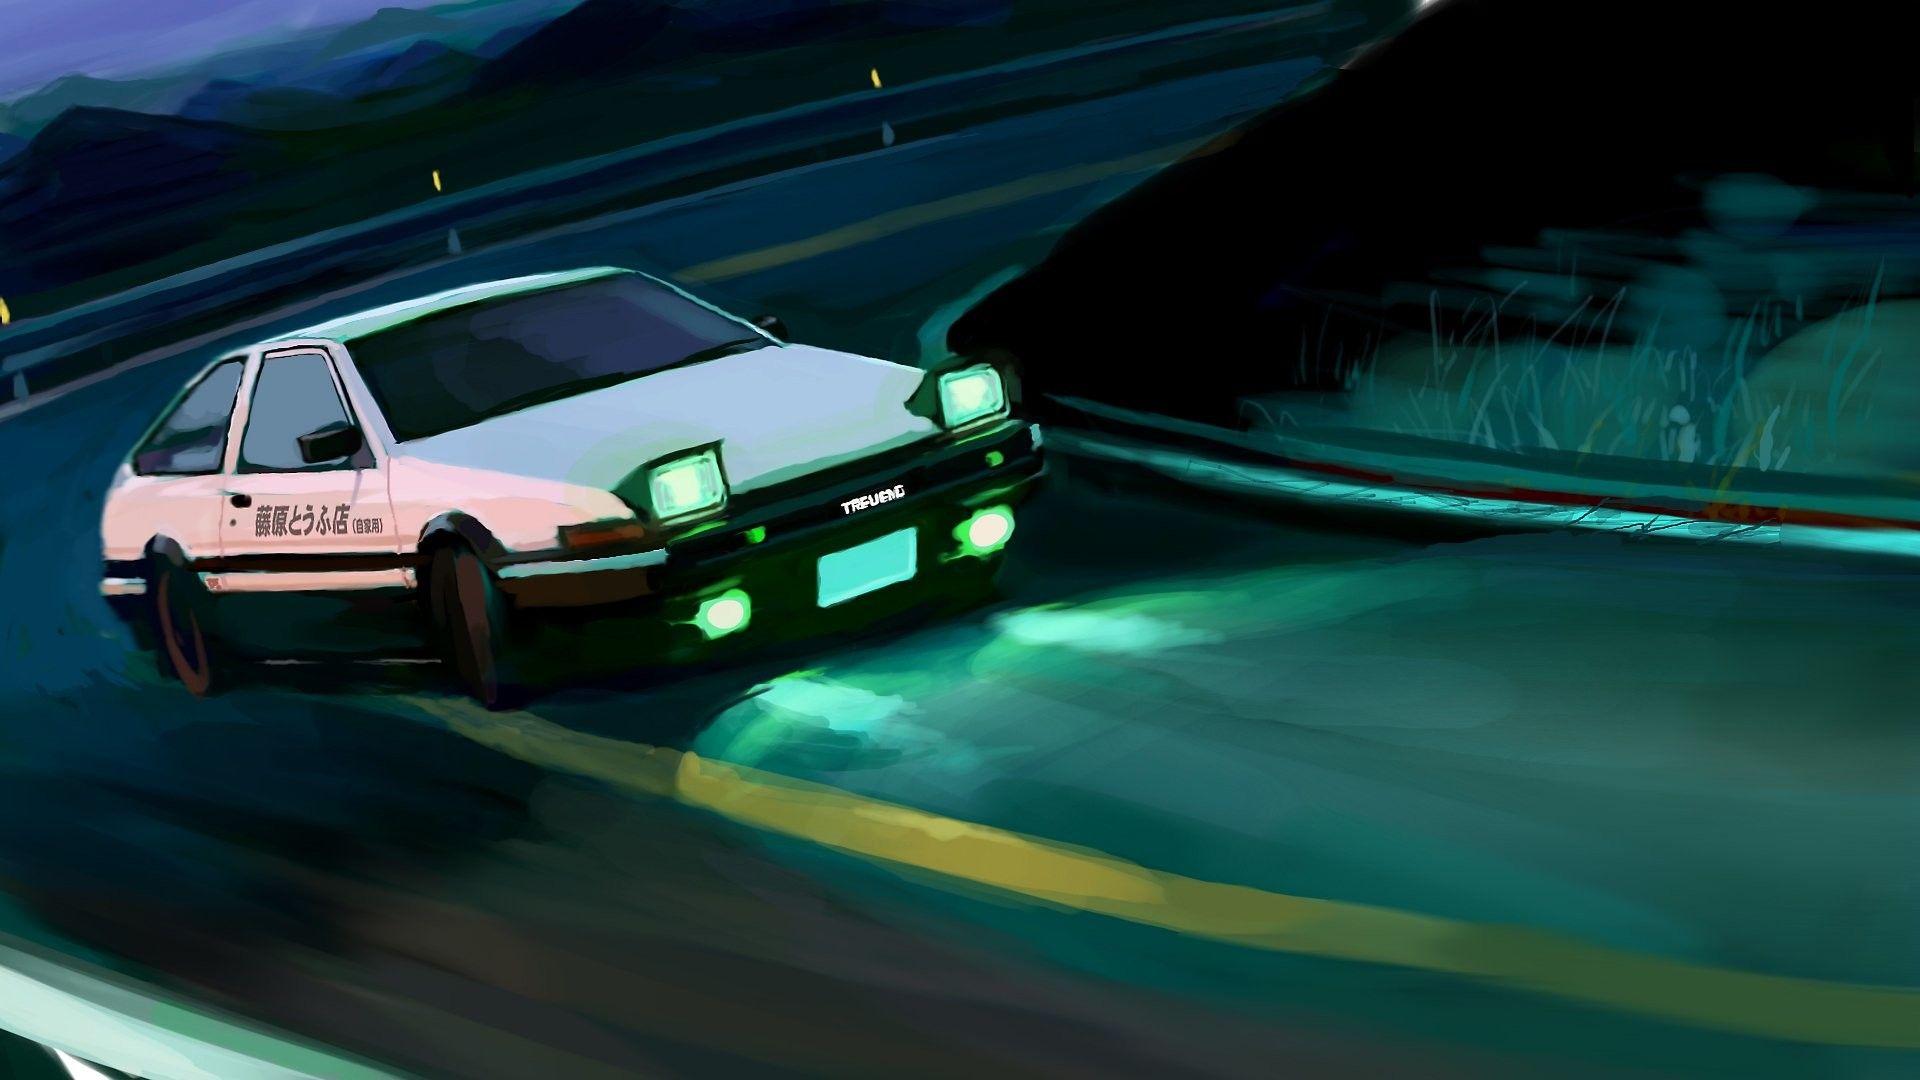 Wallpapers - Top Free Initial D Backgrounds -